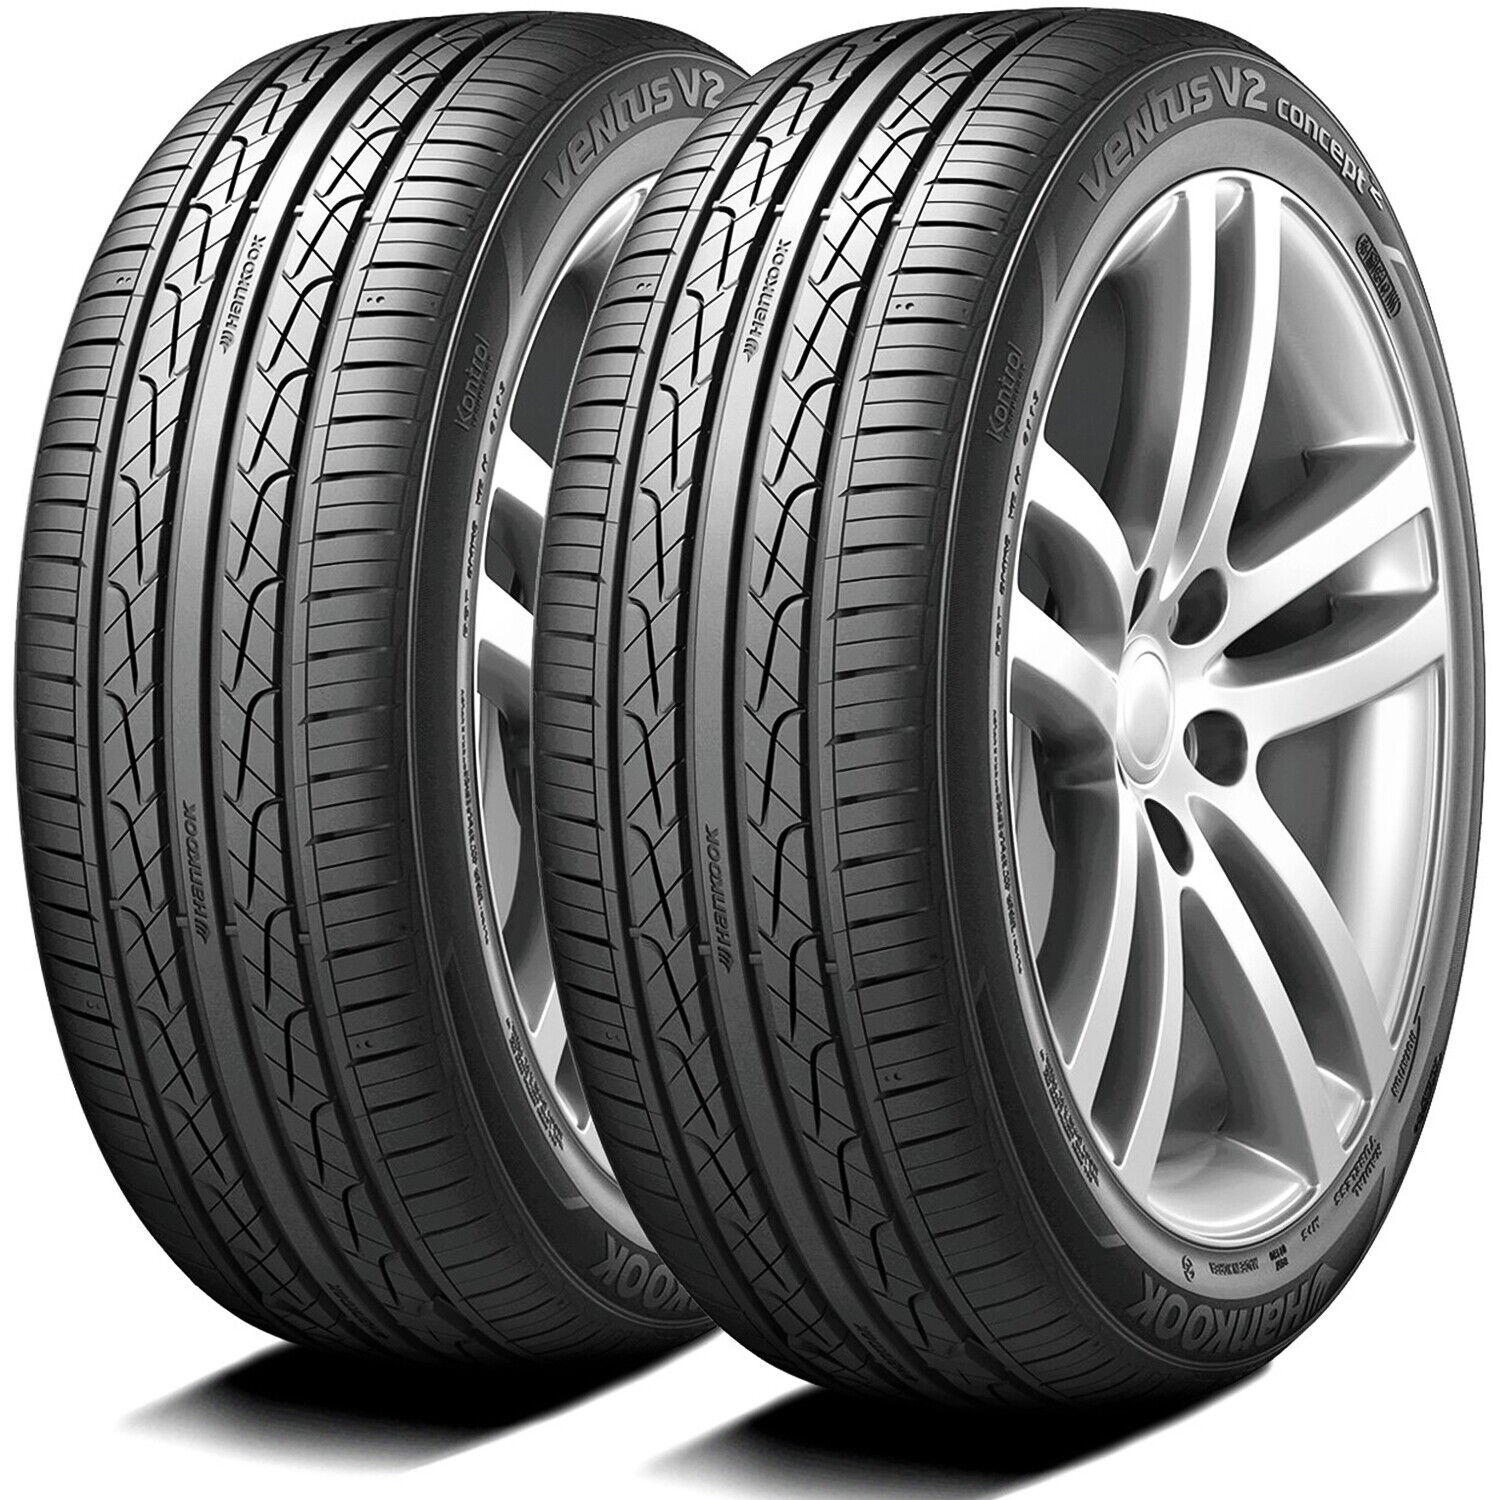 2 Tires Hankook Ventus V2 Concept2 255/40R18 99W XL AS A/S High Performance